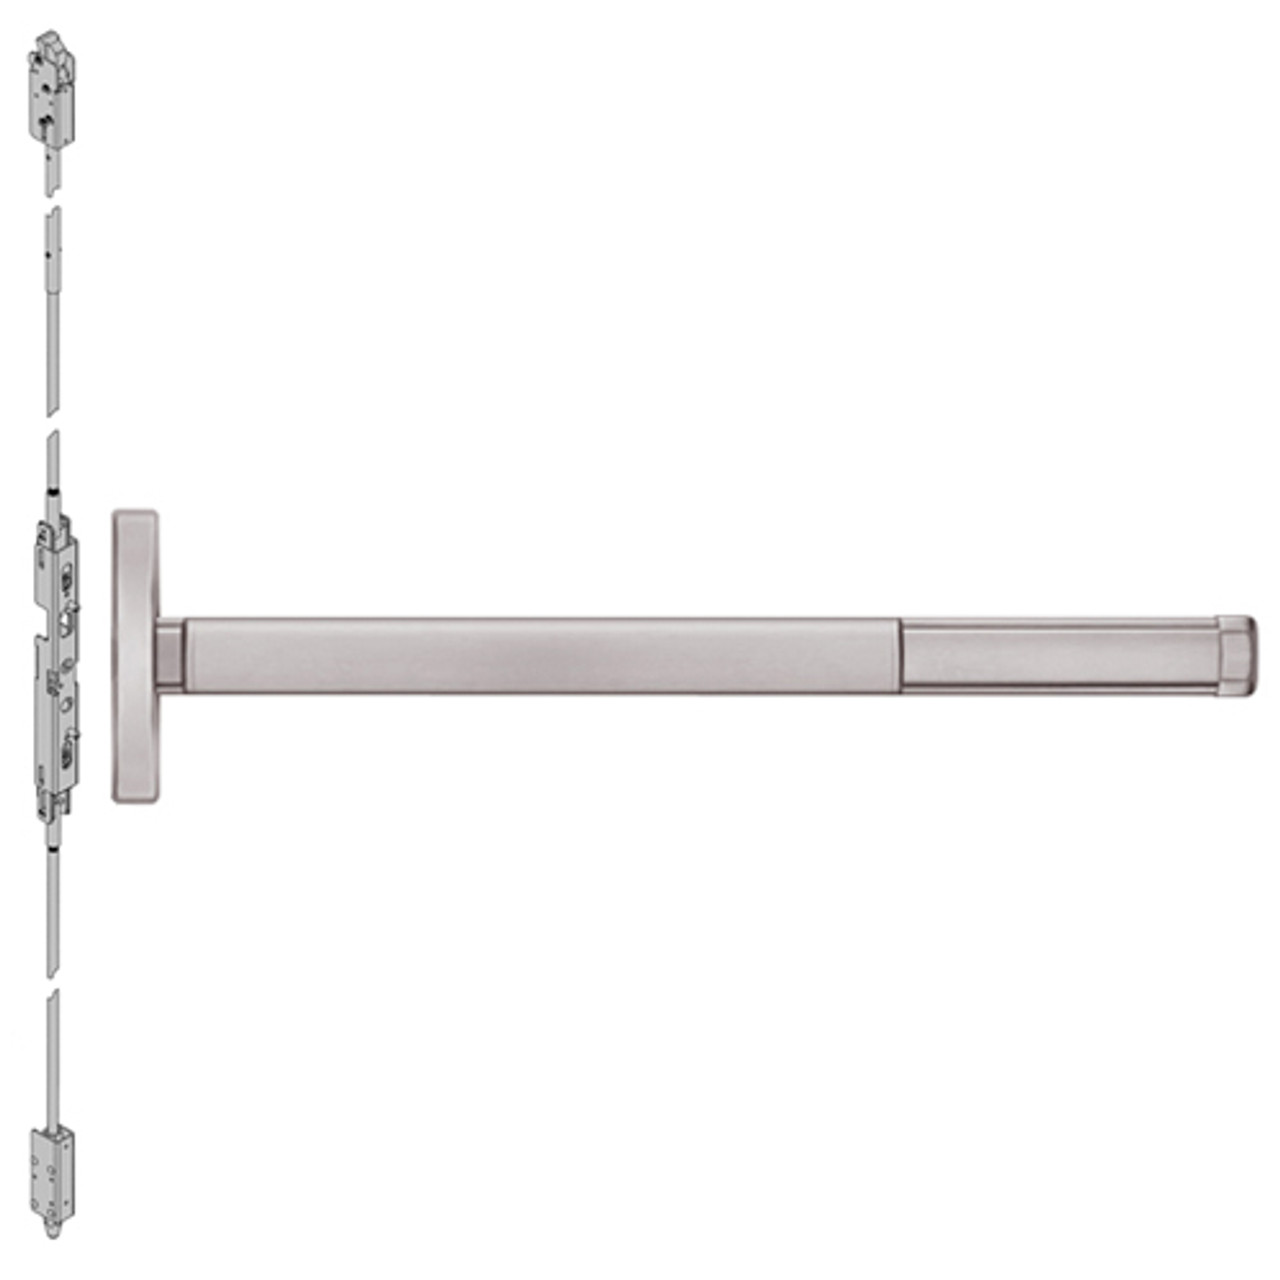 DEFL2601LBR-628-48 PHI 2600 Series Fire Rated Concealed Vertical Rod Exit Device with Delayed Egress Prepped for Cover Plate in Satin Aluminum Finish